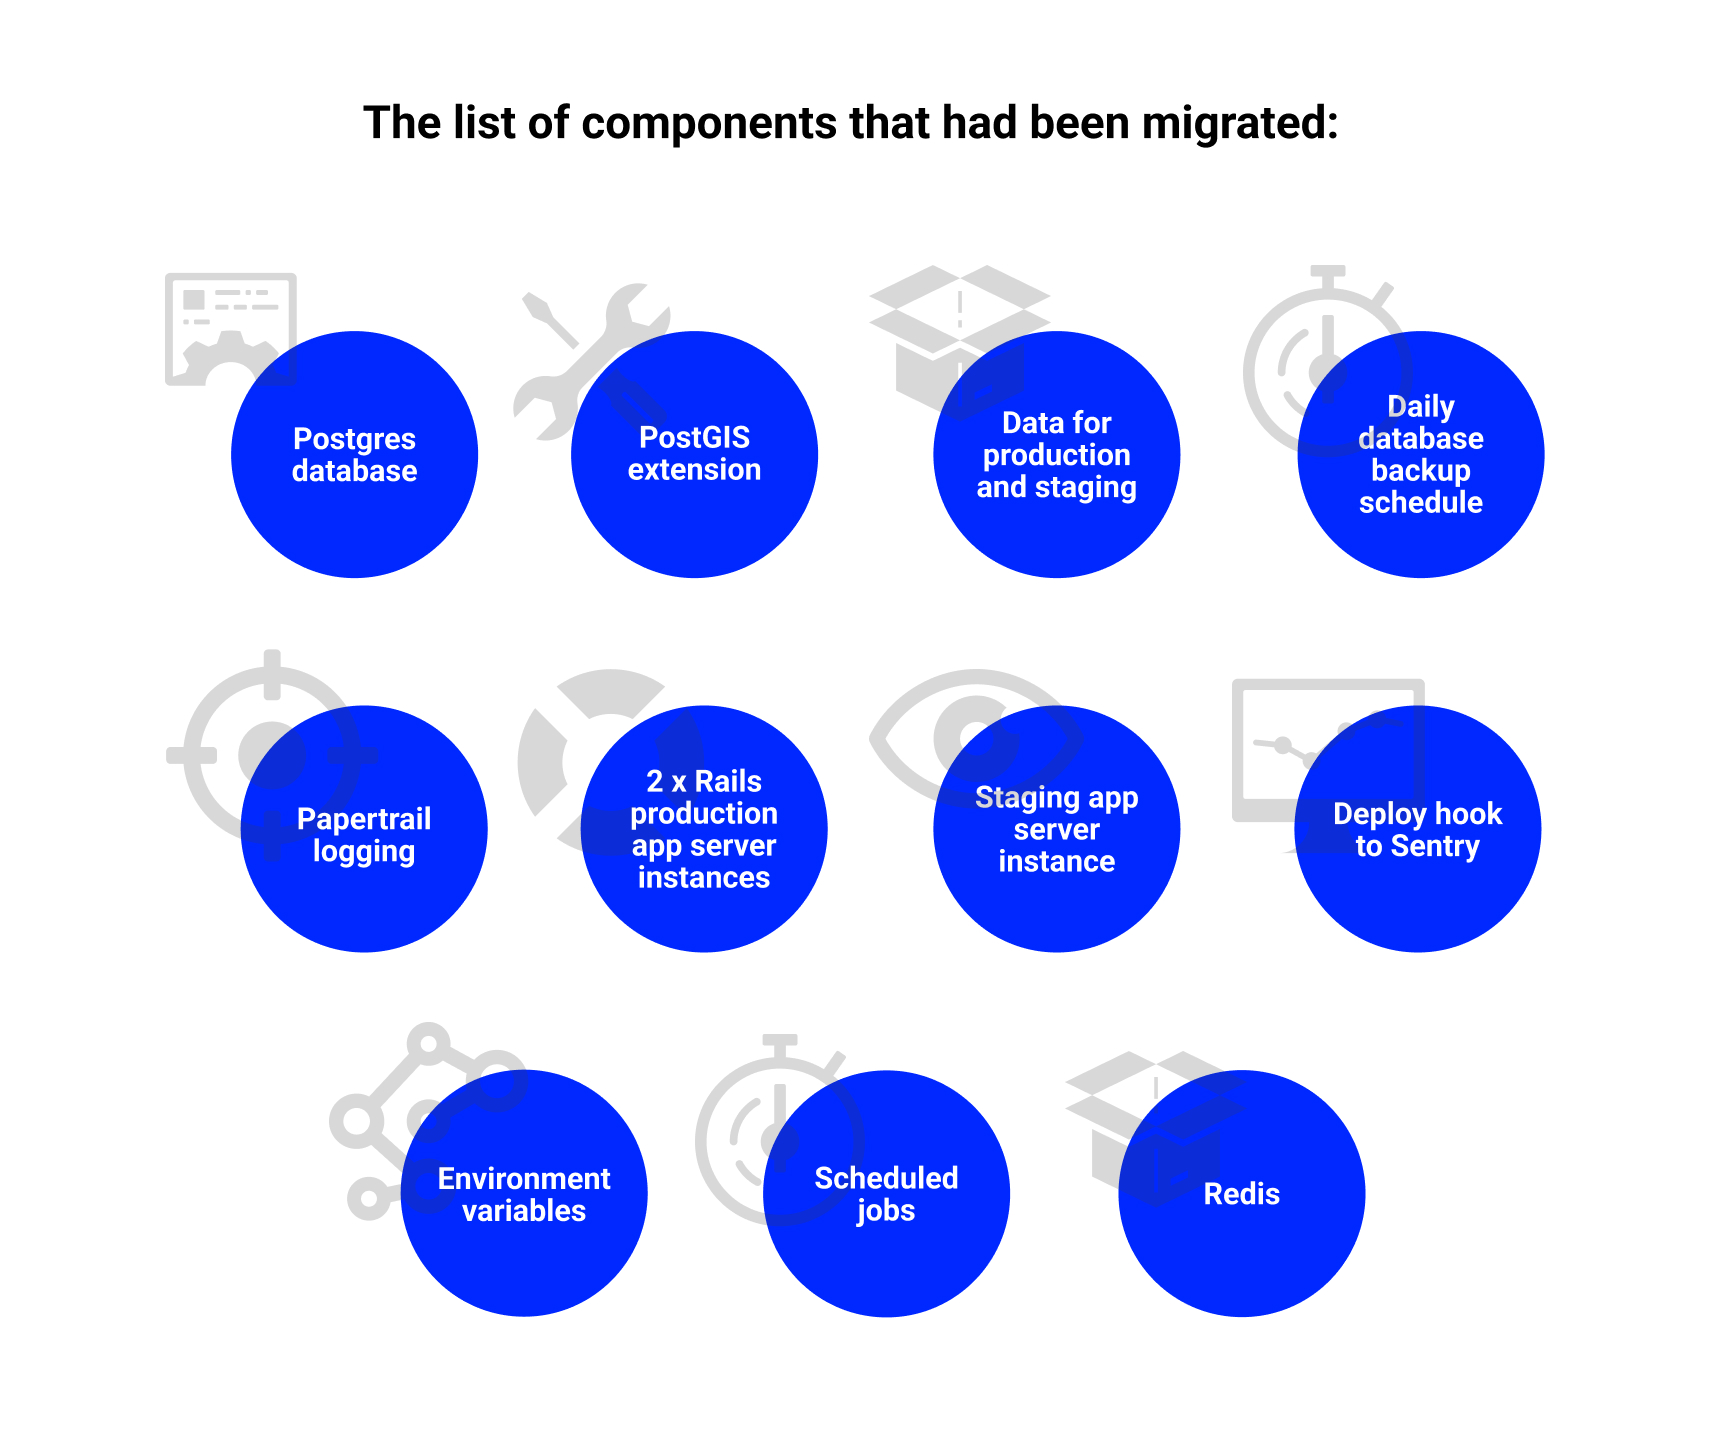 The list of components that had been migrated